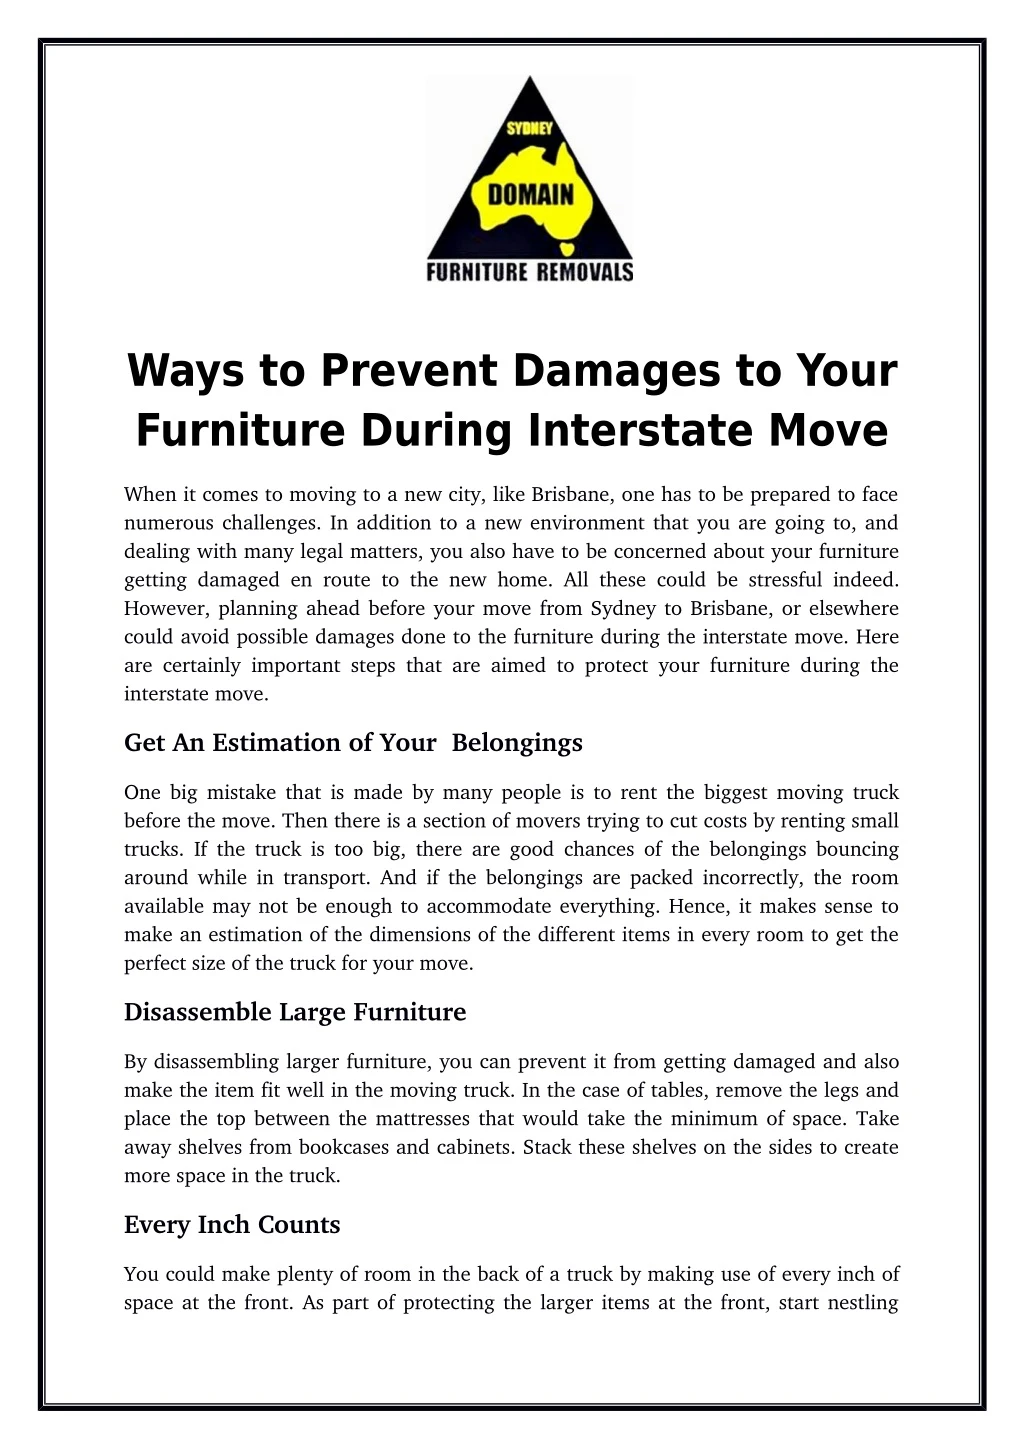 ways to prevent damages to your furniture during